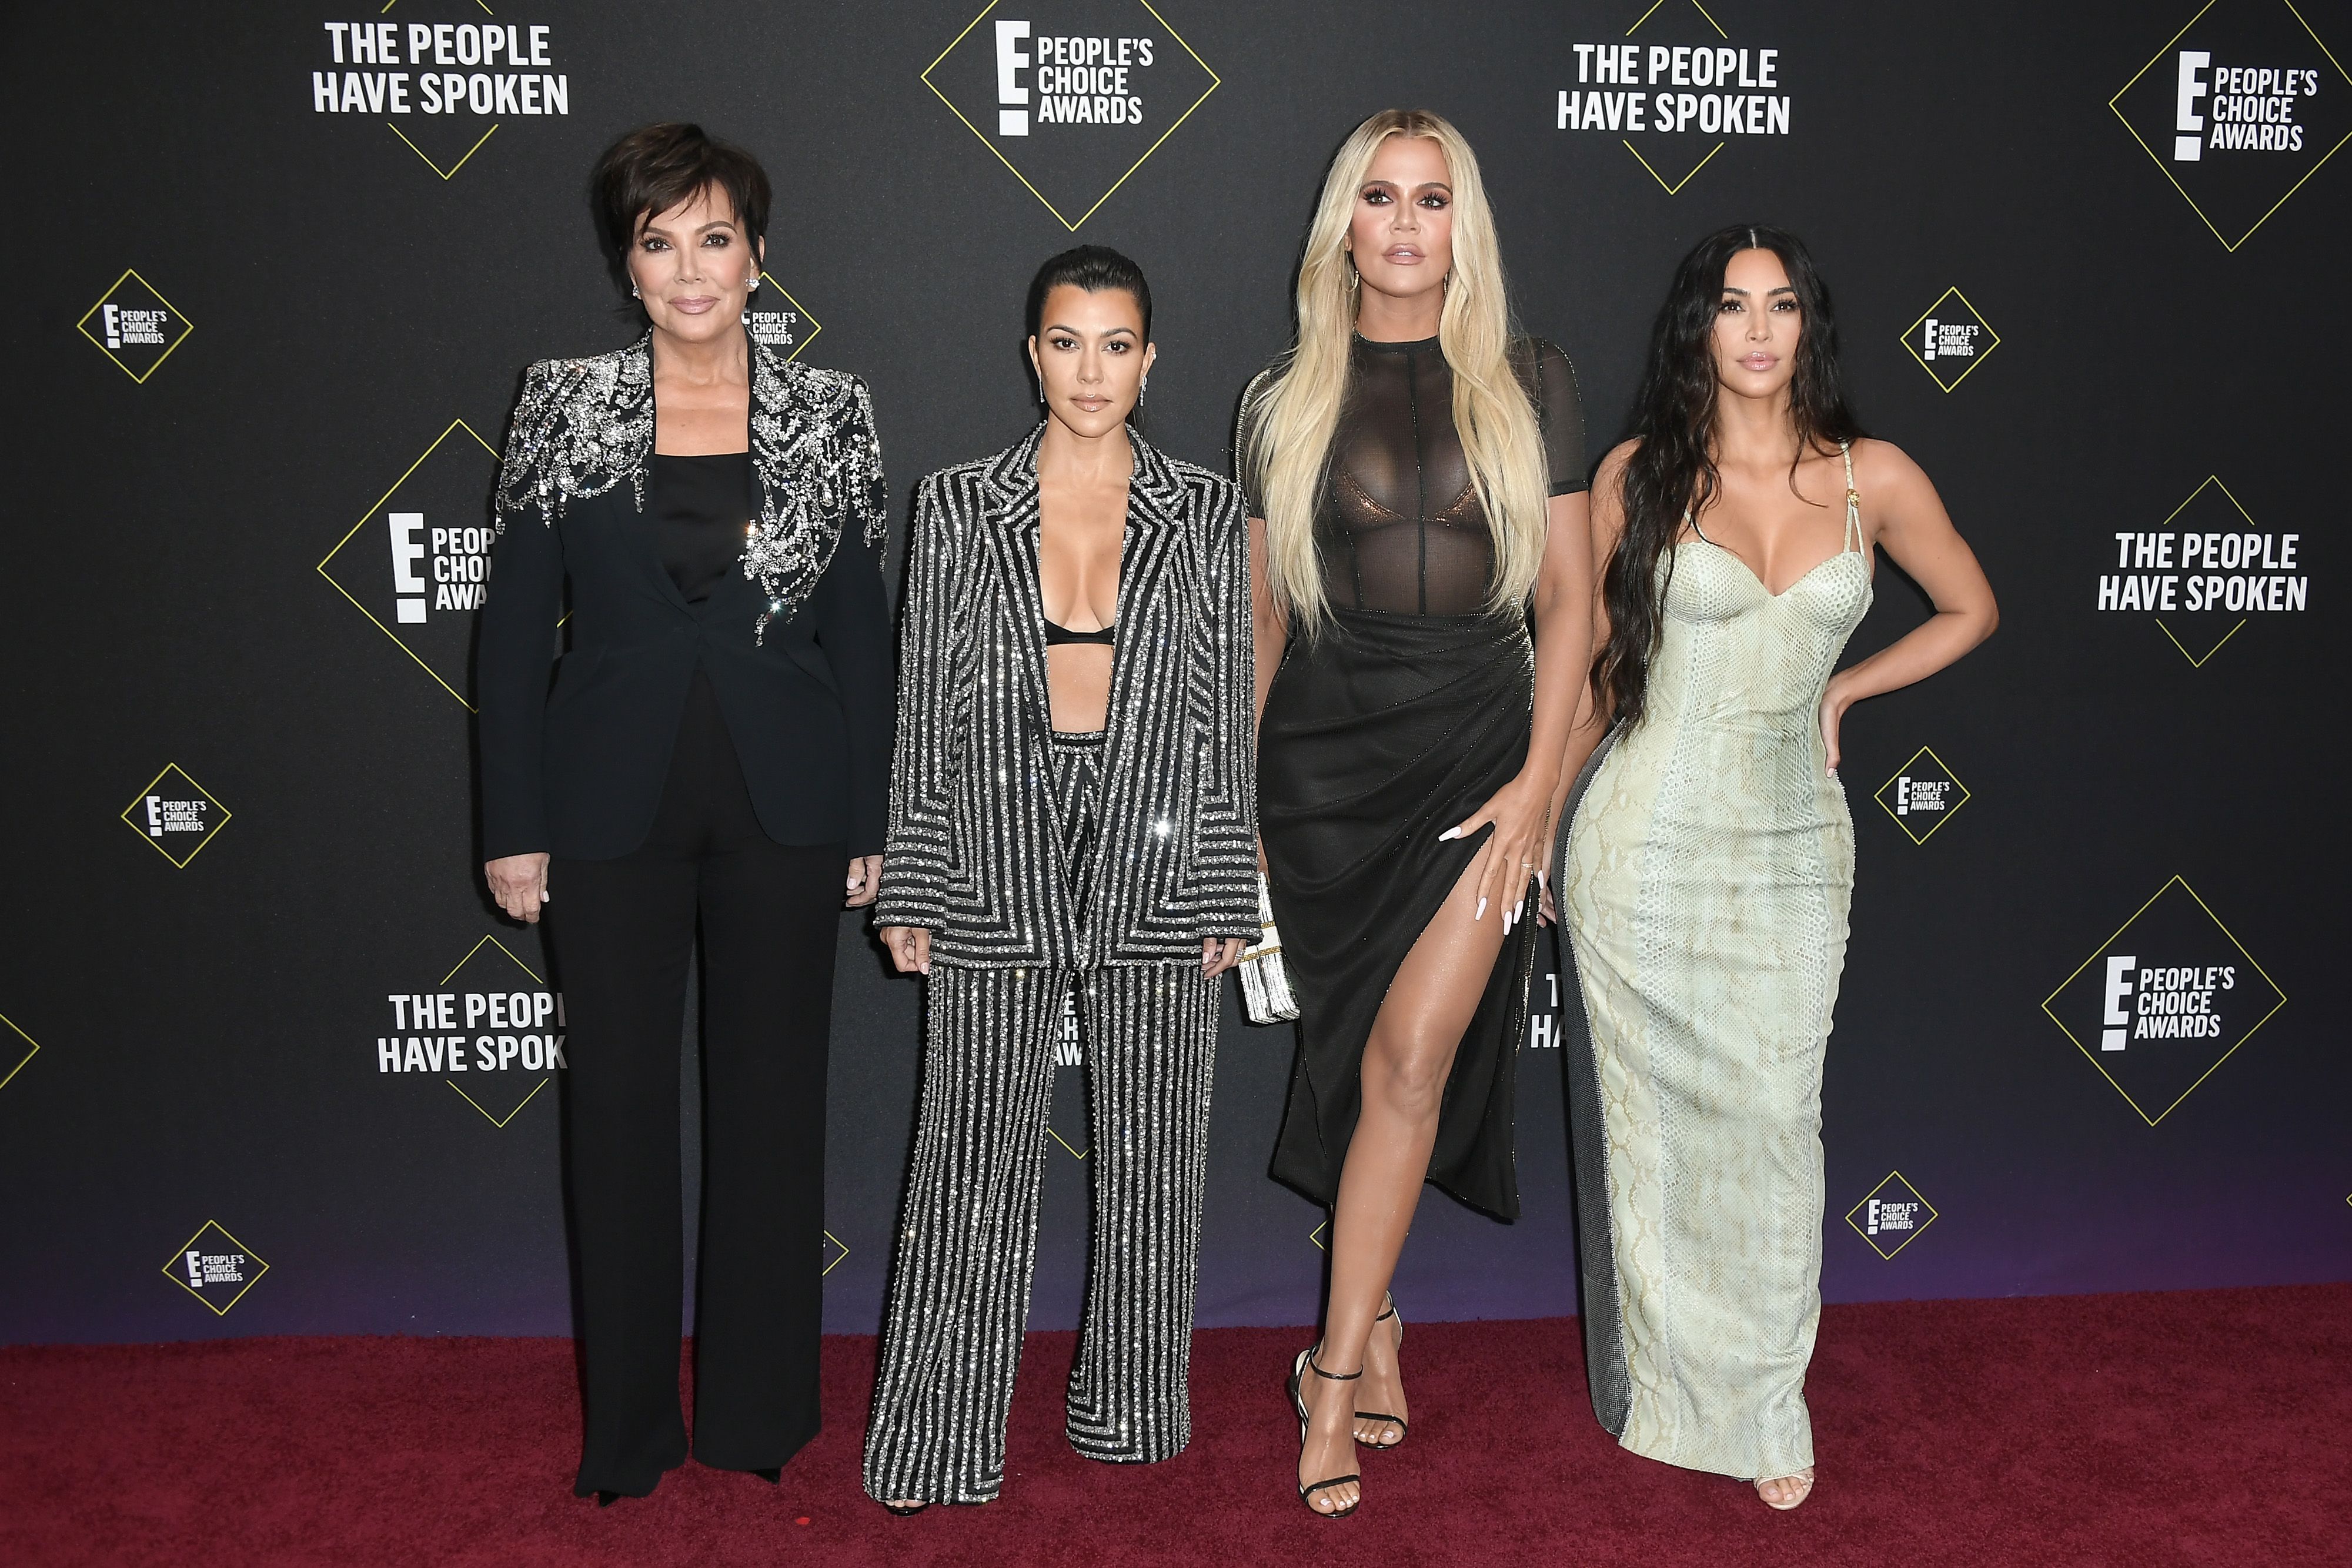 Kim Kardashian Announces That Keeping Up with the Kardashians Will End in 2021